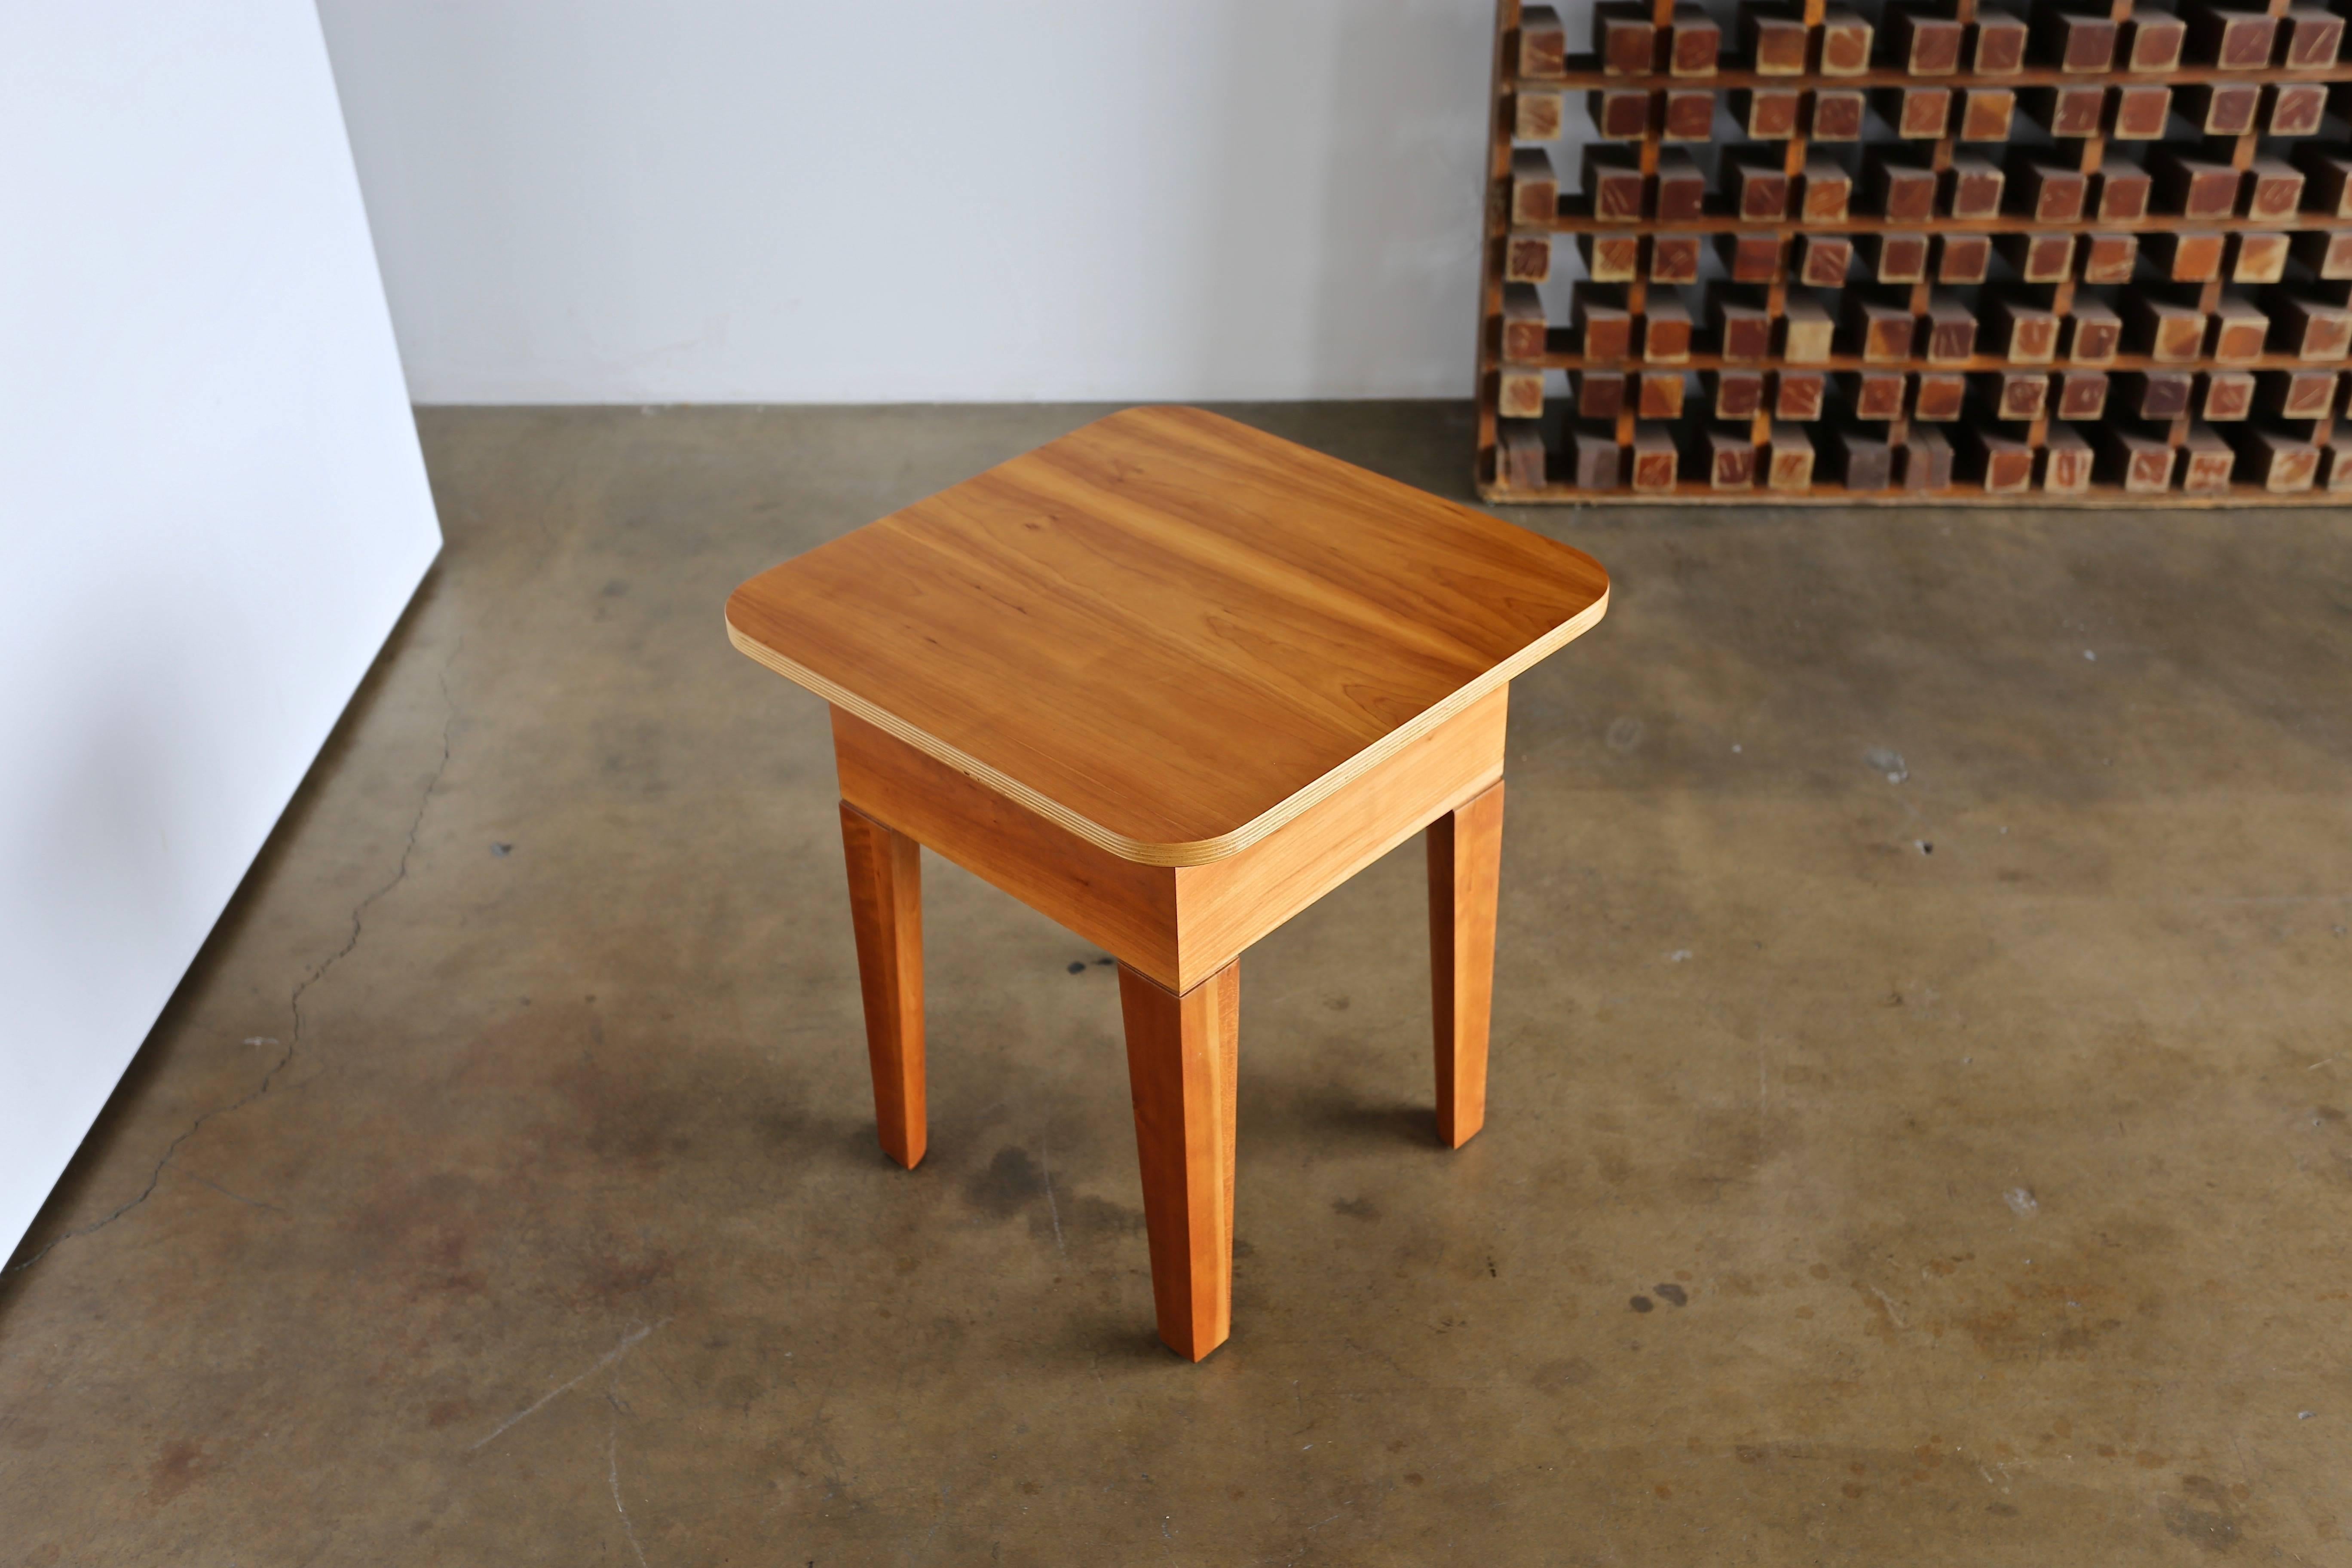 Roy McMakin 'Cove' occasional table. Designed 1988 for Domestic Furniture Co. This piece has been professionally restored.

He began his studies at the Museum Art School in Portland, but soon transferred to the University of California, San Diego,